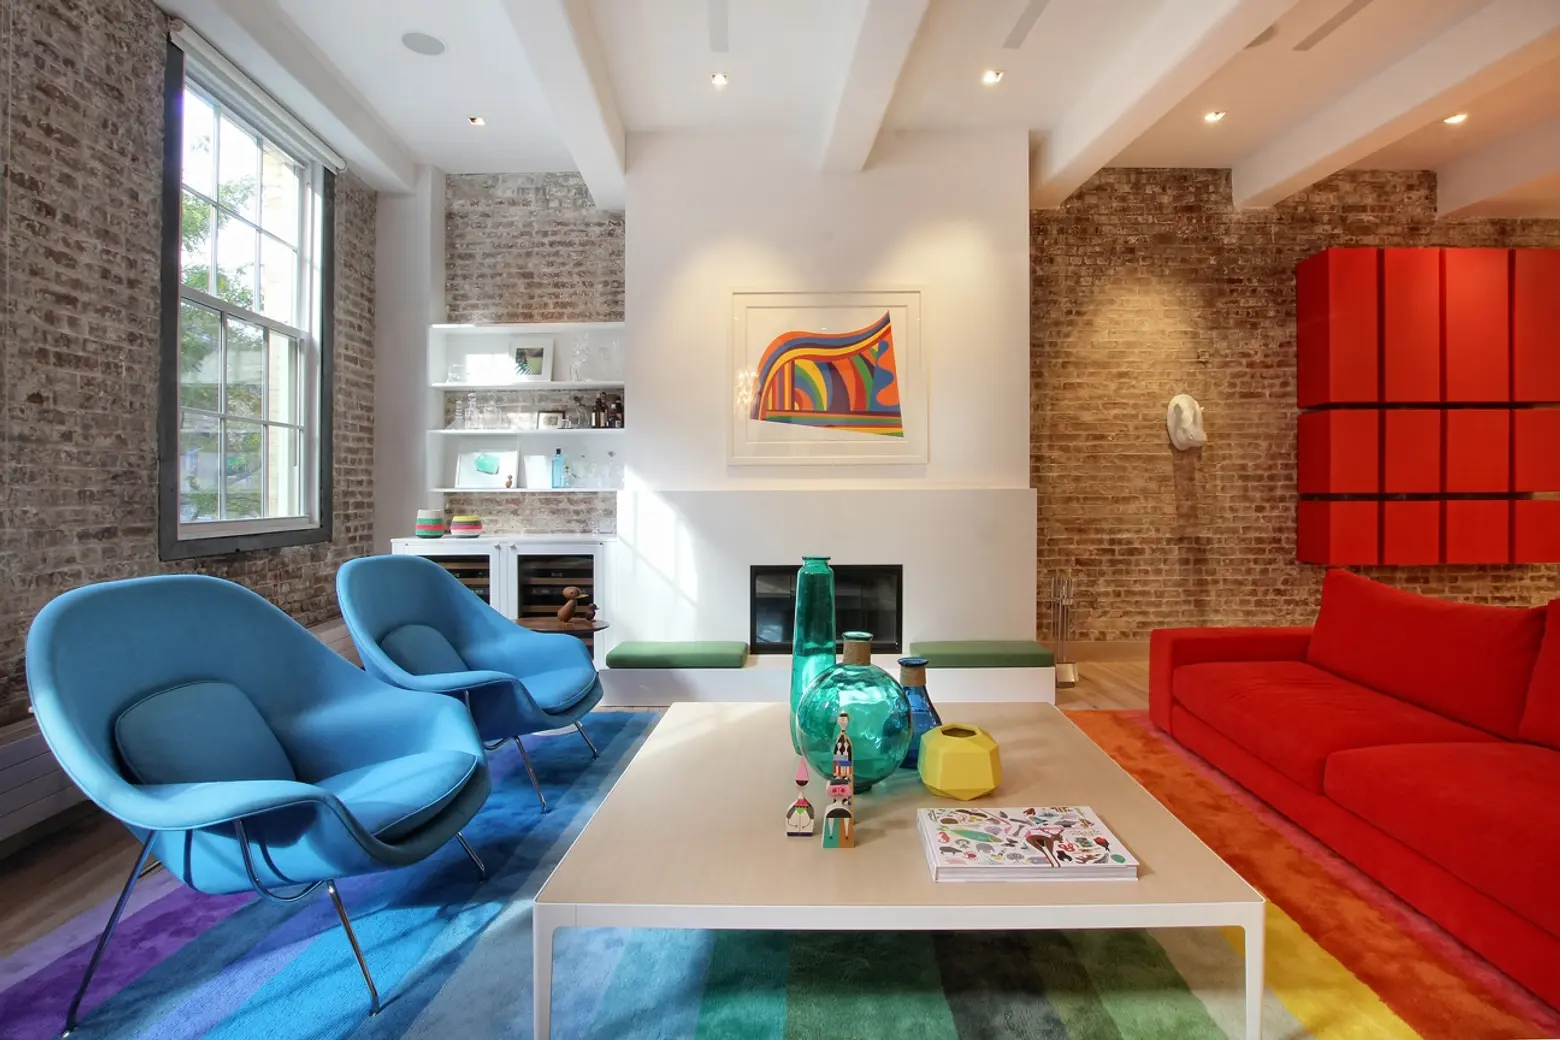 Ghislaine Viñas’ Colorful and Eclectic Design Seamlessly Blends Together on Greenwich Street